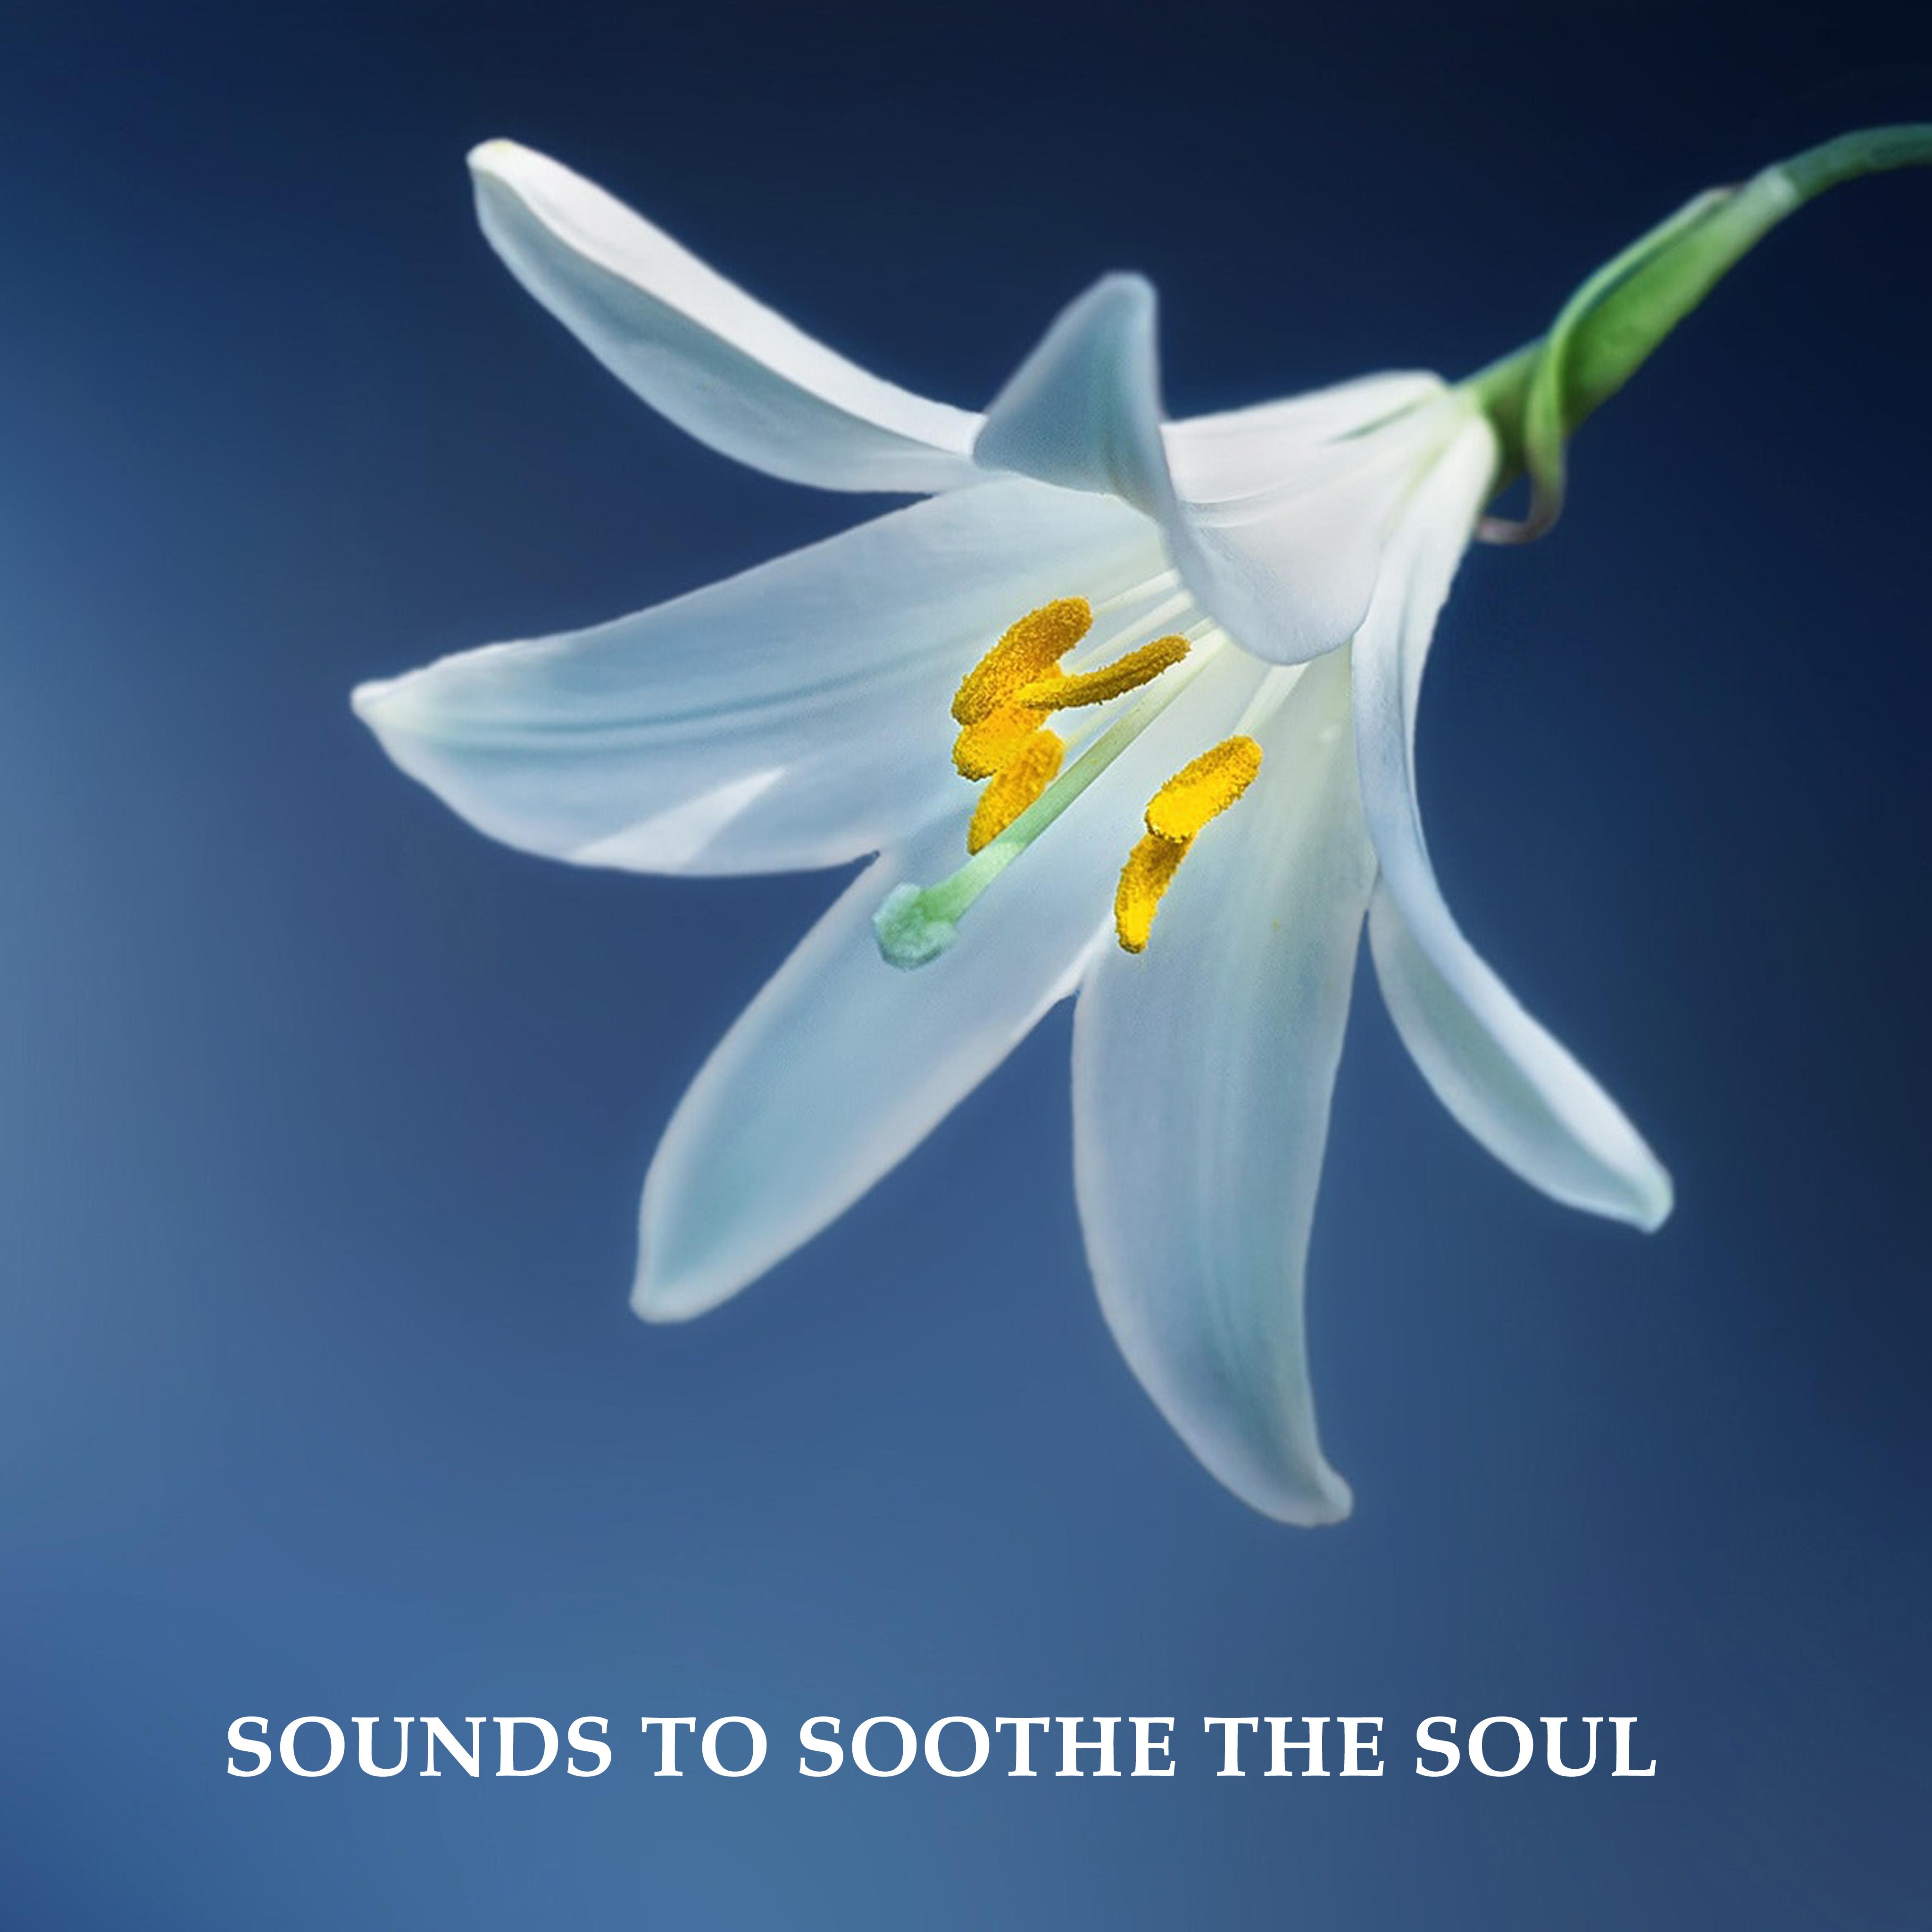 12 Sounds to Soothe the Soul